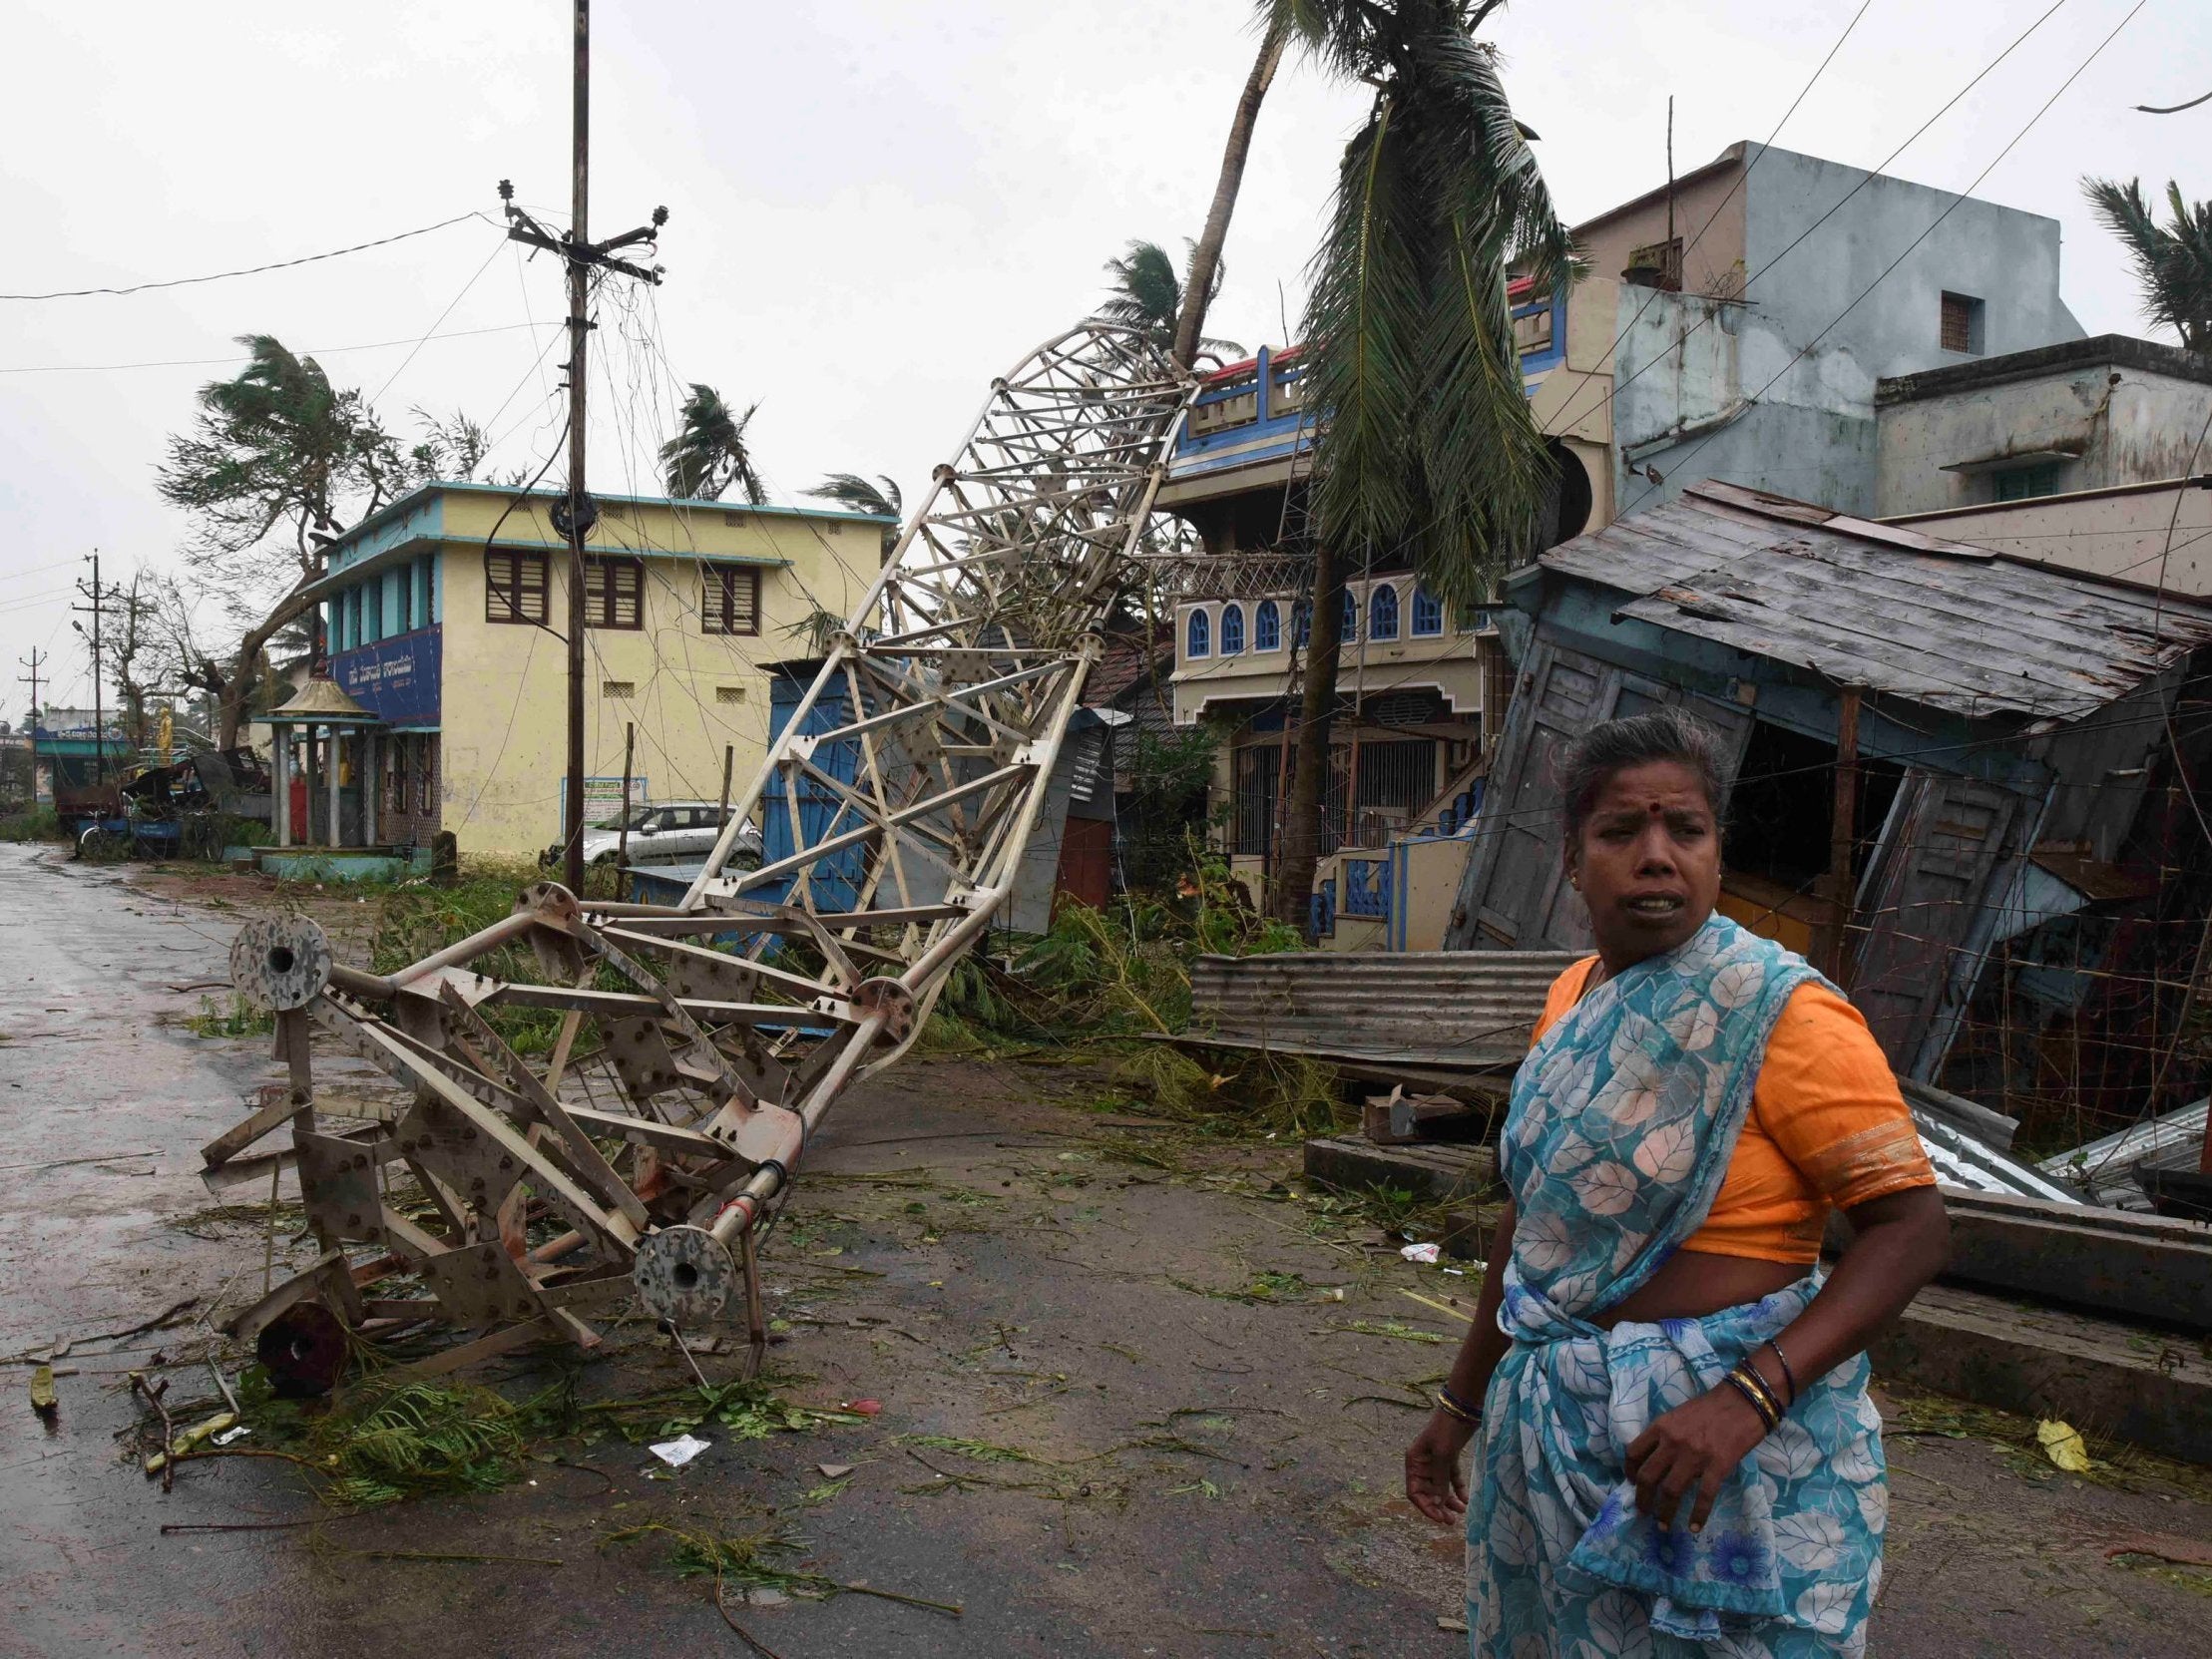 A communication tower felled by a cyclone in India in 2018